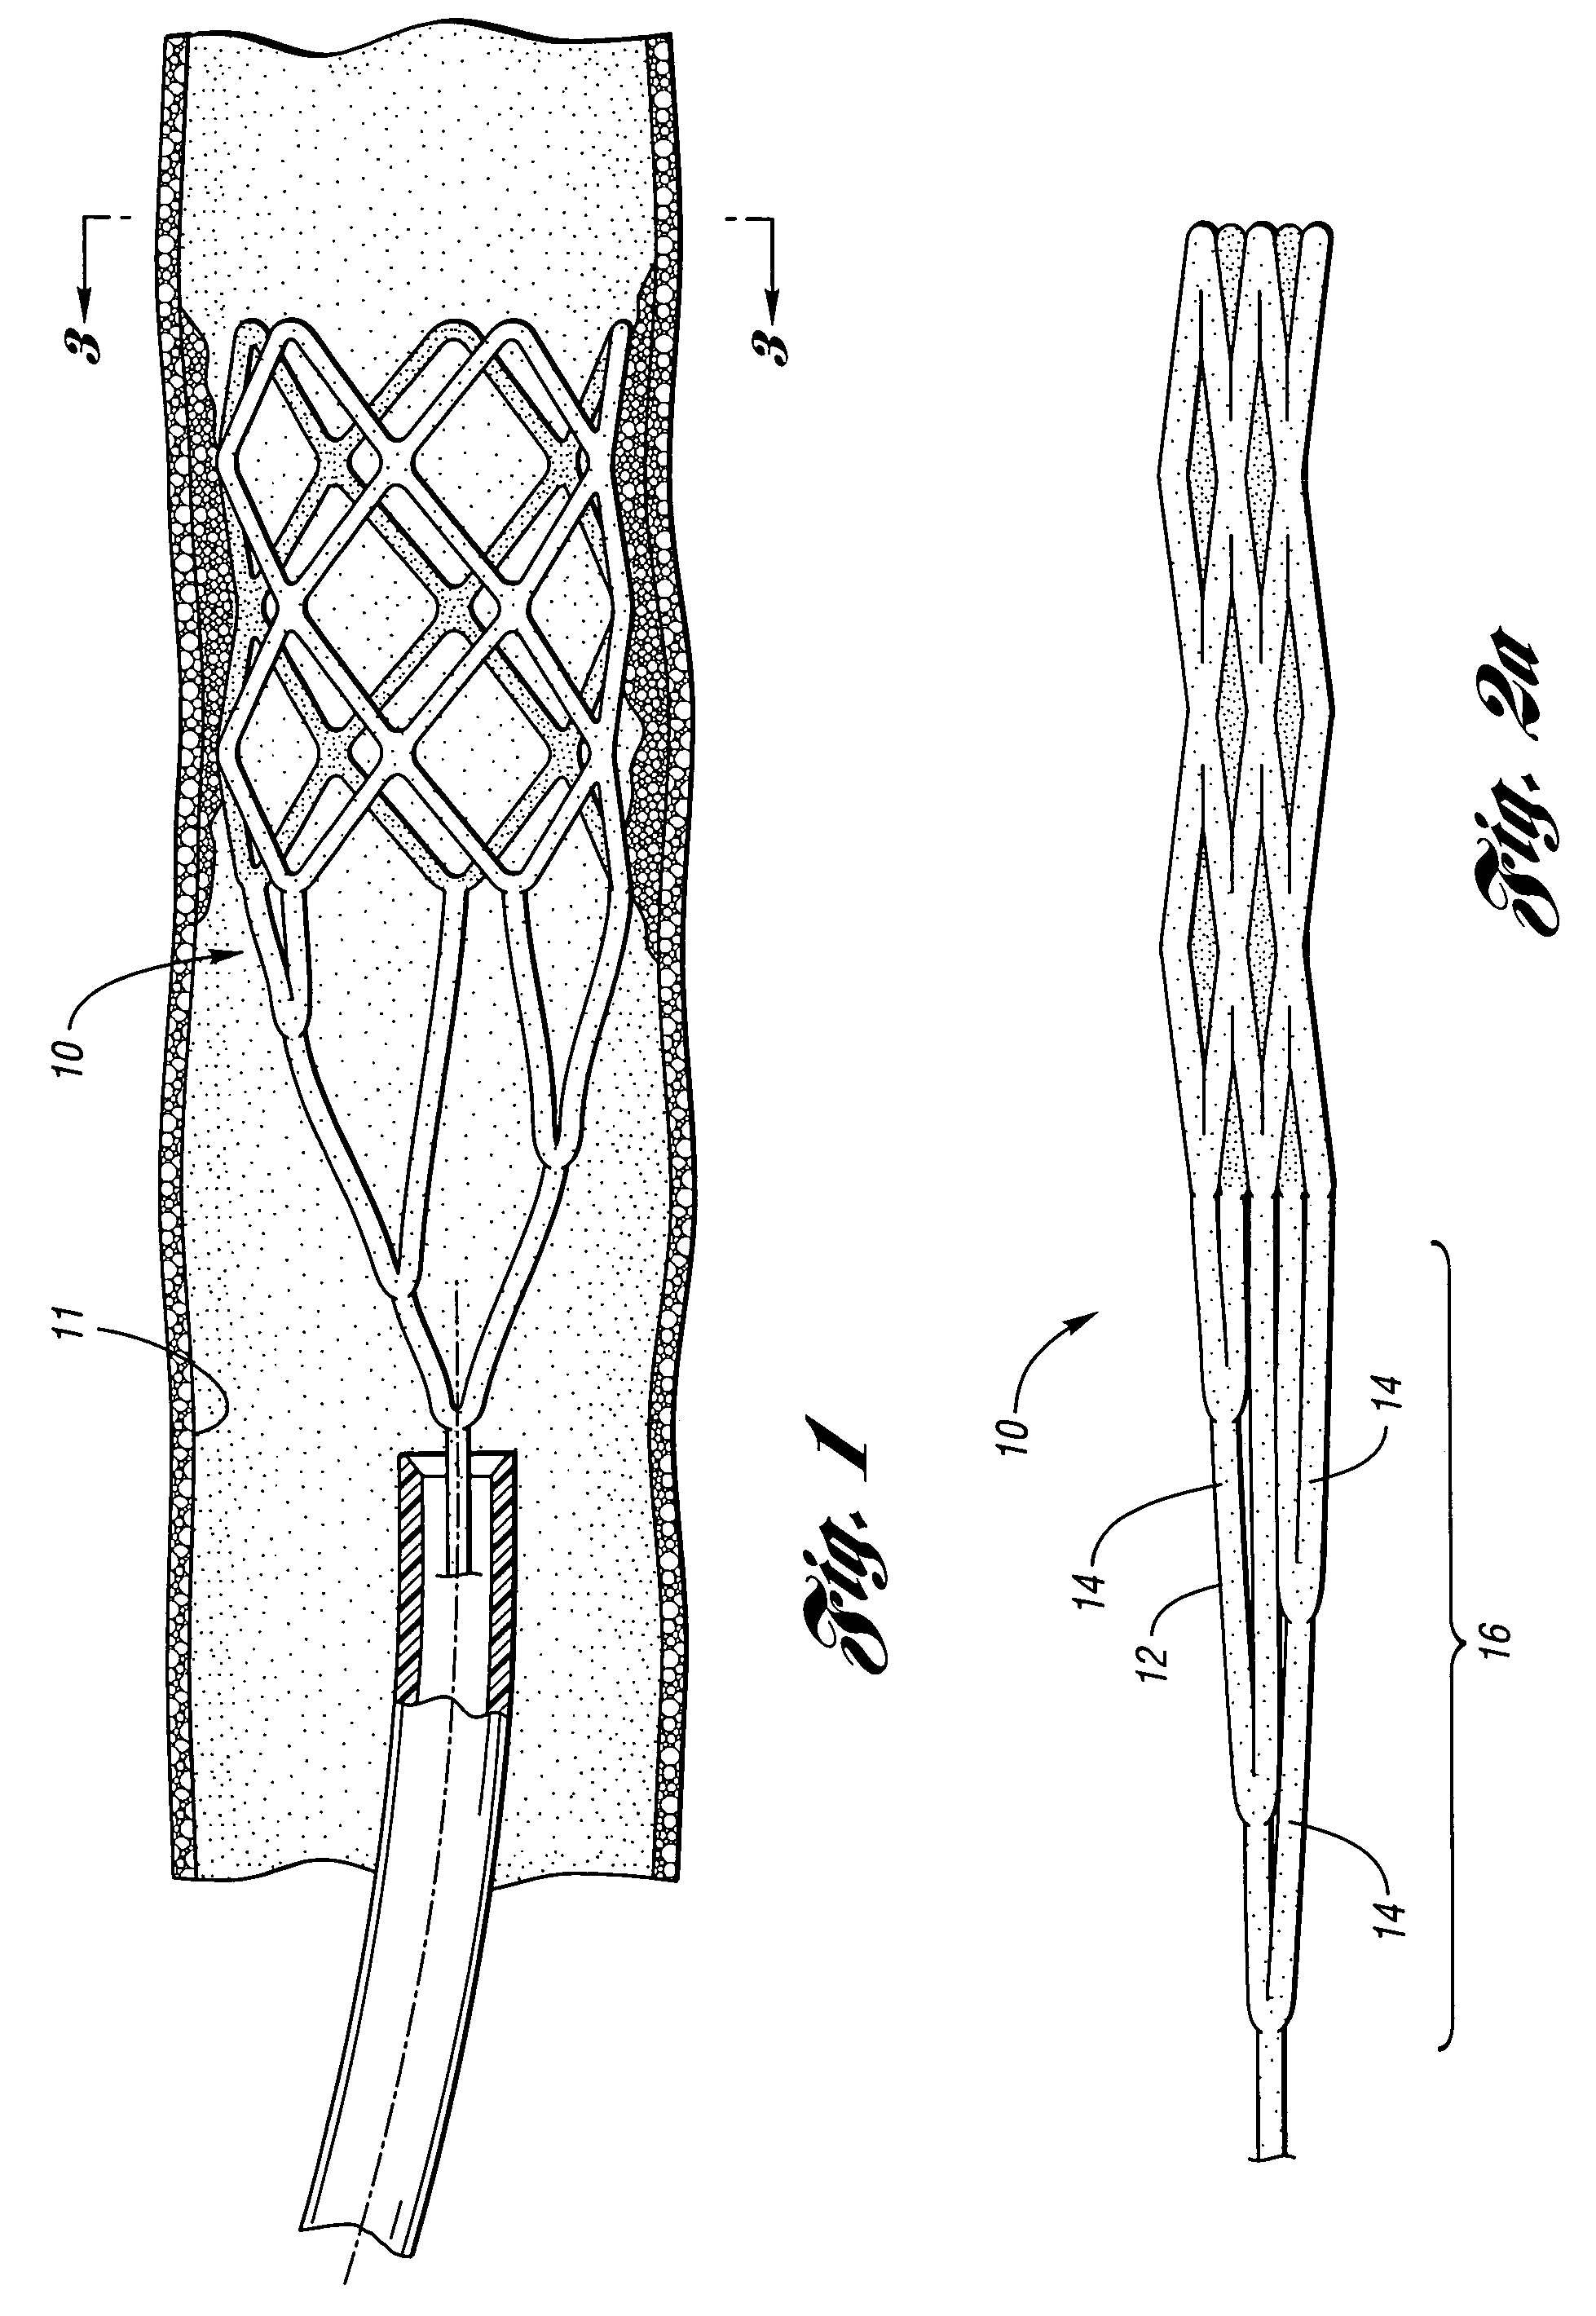 Retrievable device having a reticulation portion with staggered struts